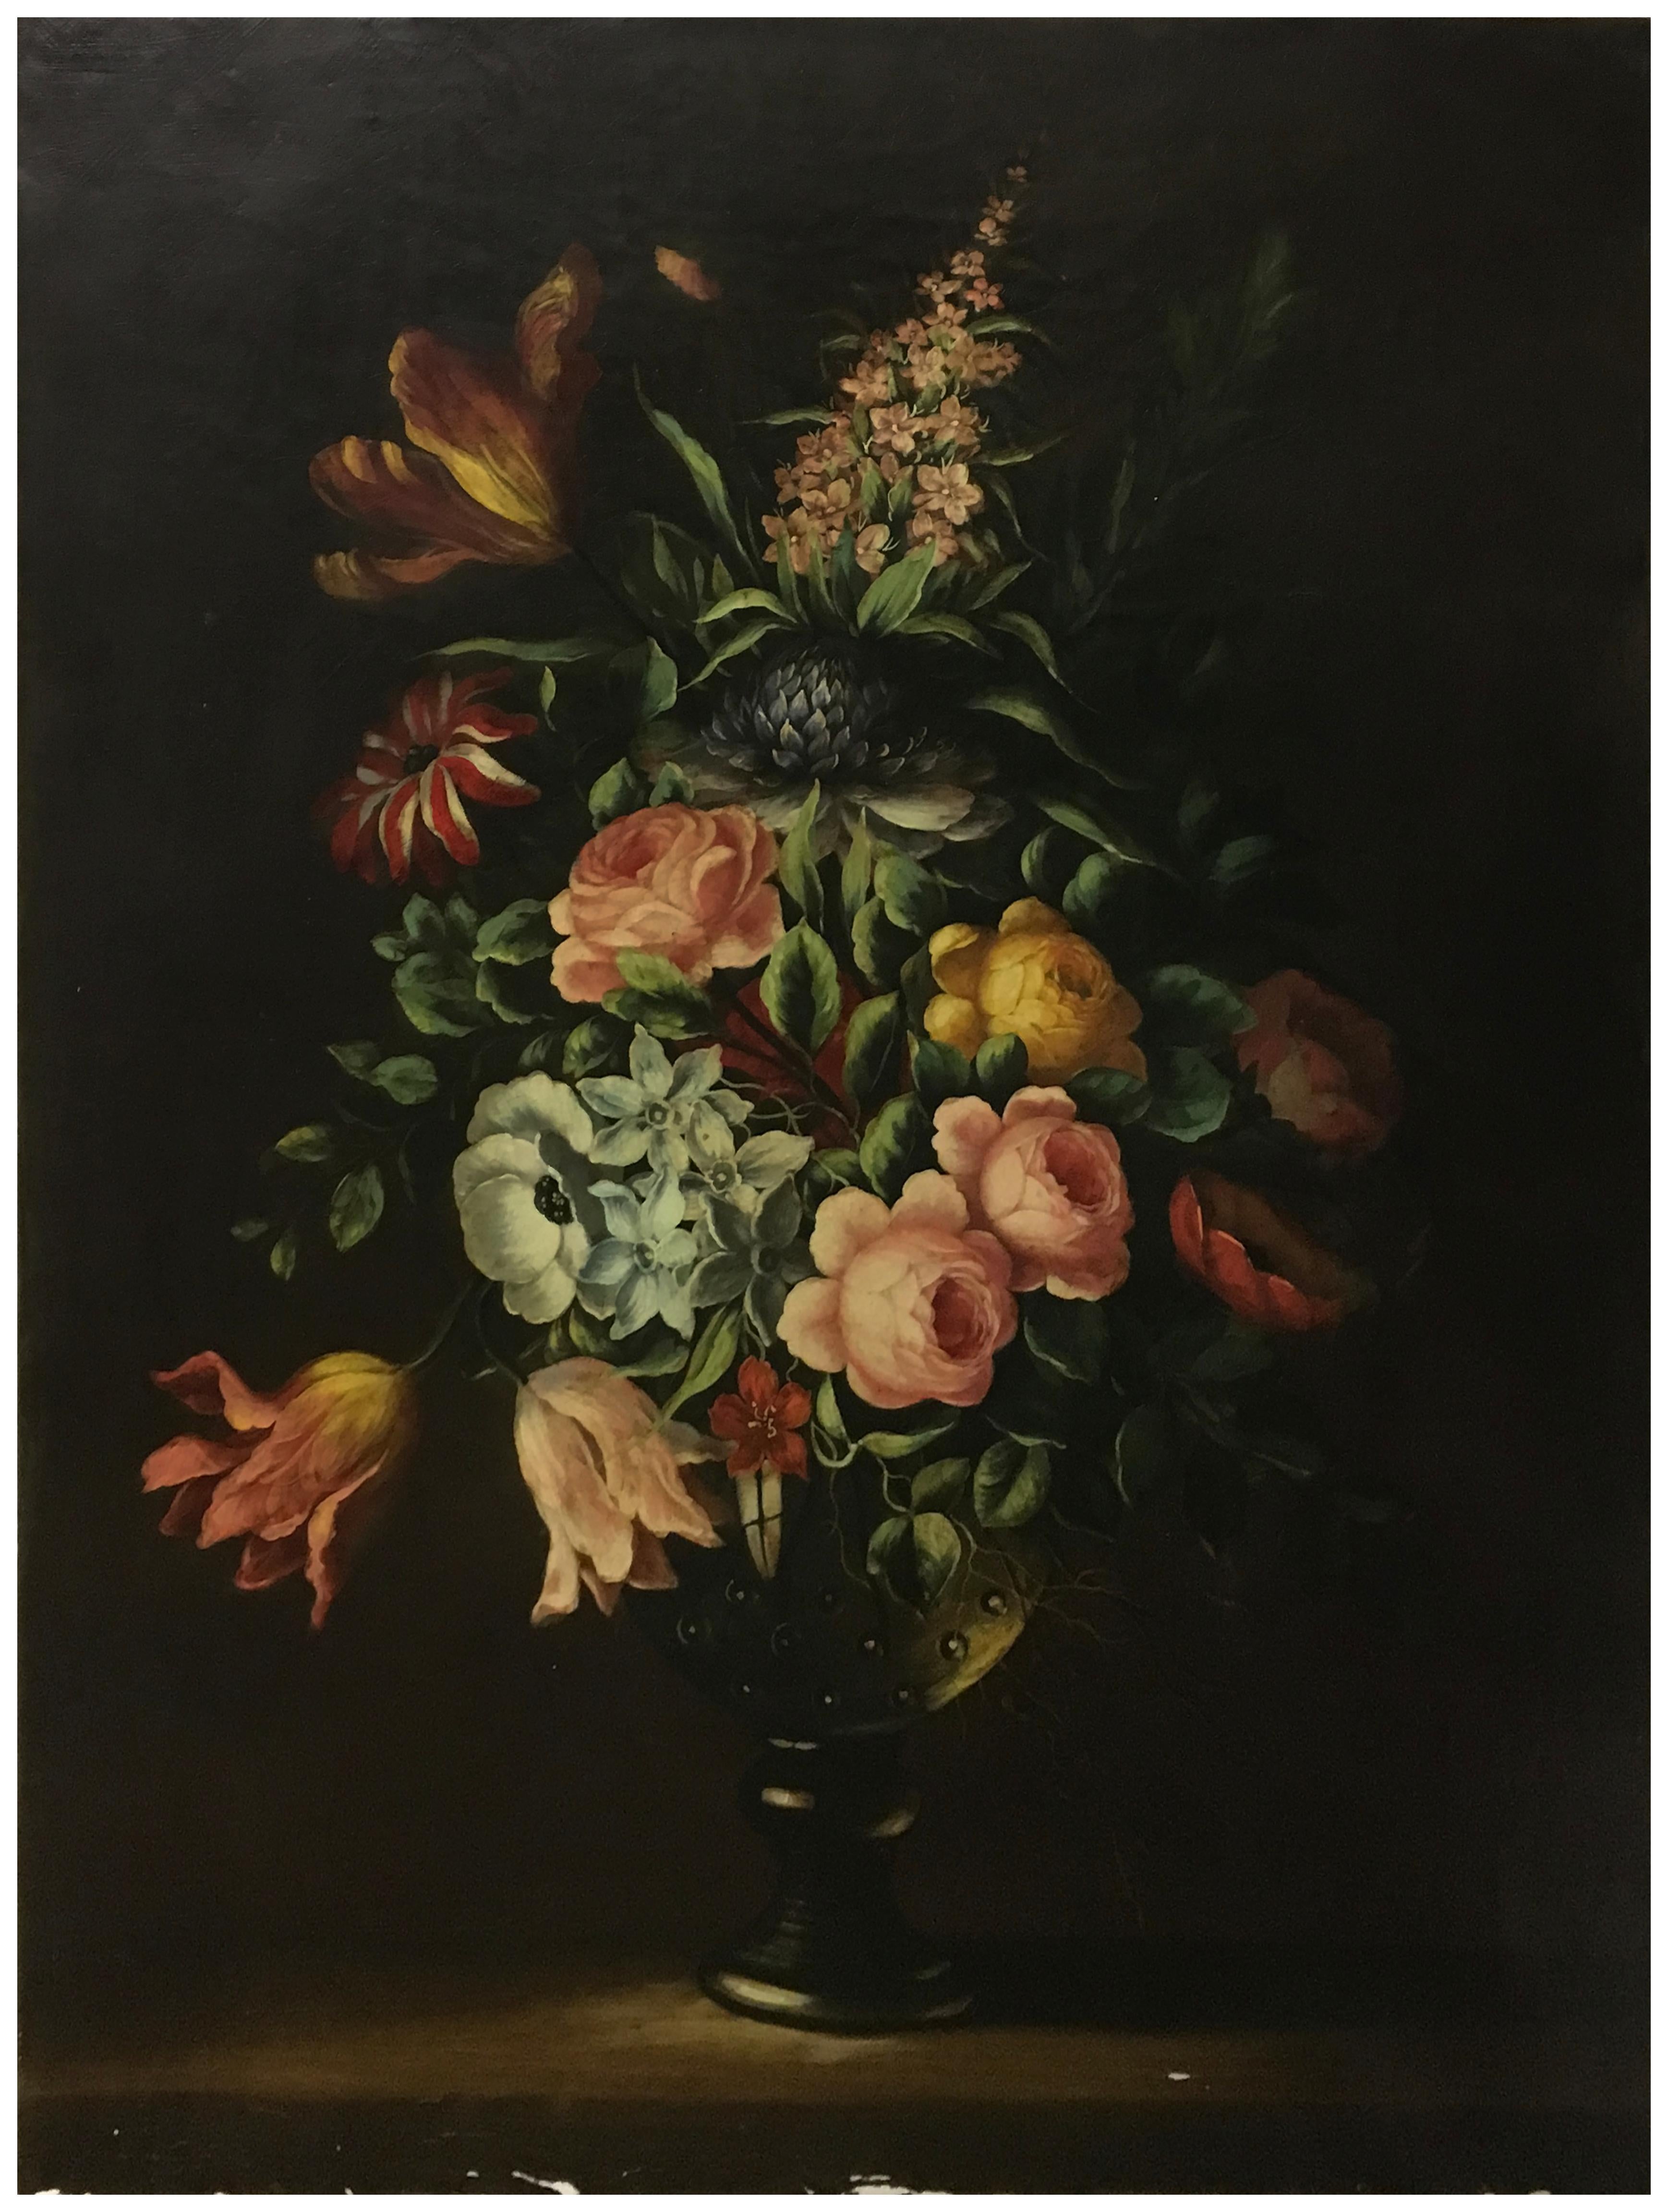 FLOWERS - In the Manner of J.B. Monnoyer - Oil on Canvas  Italian Painting - Black Still-Life Painting by Carlo De Tommasi